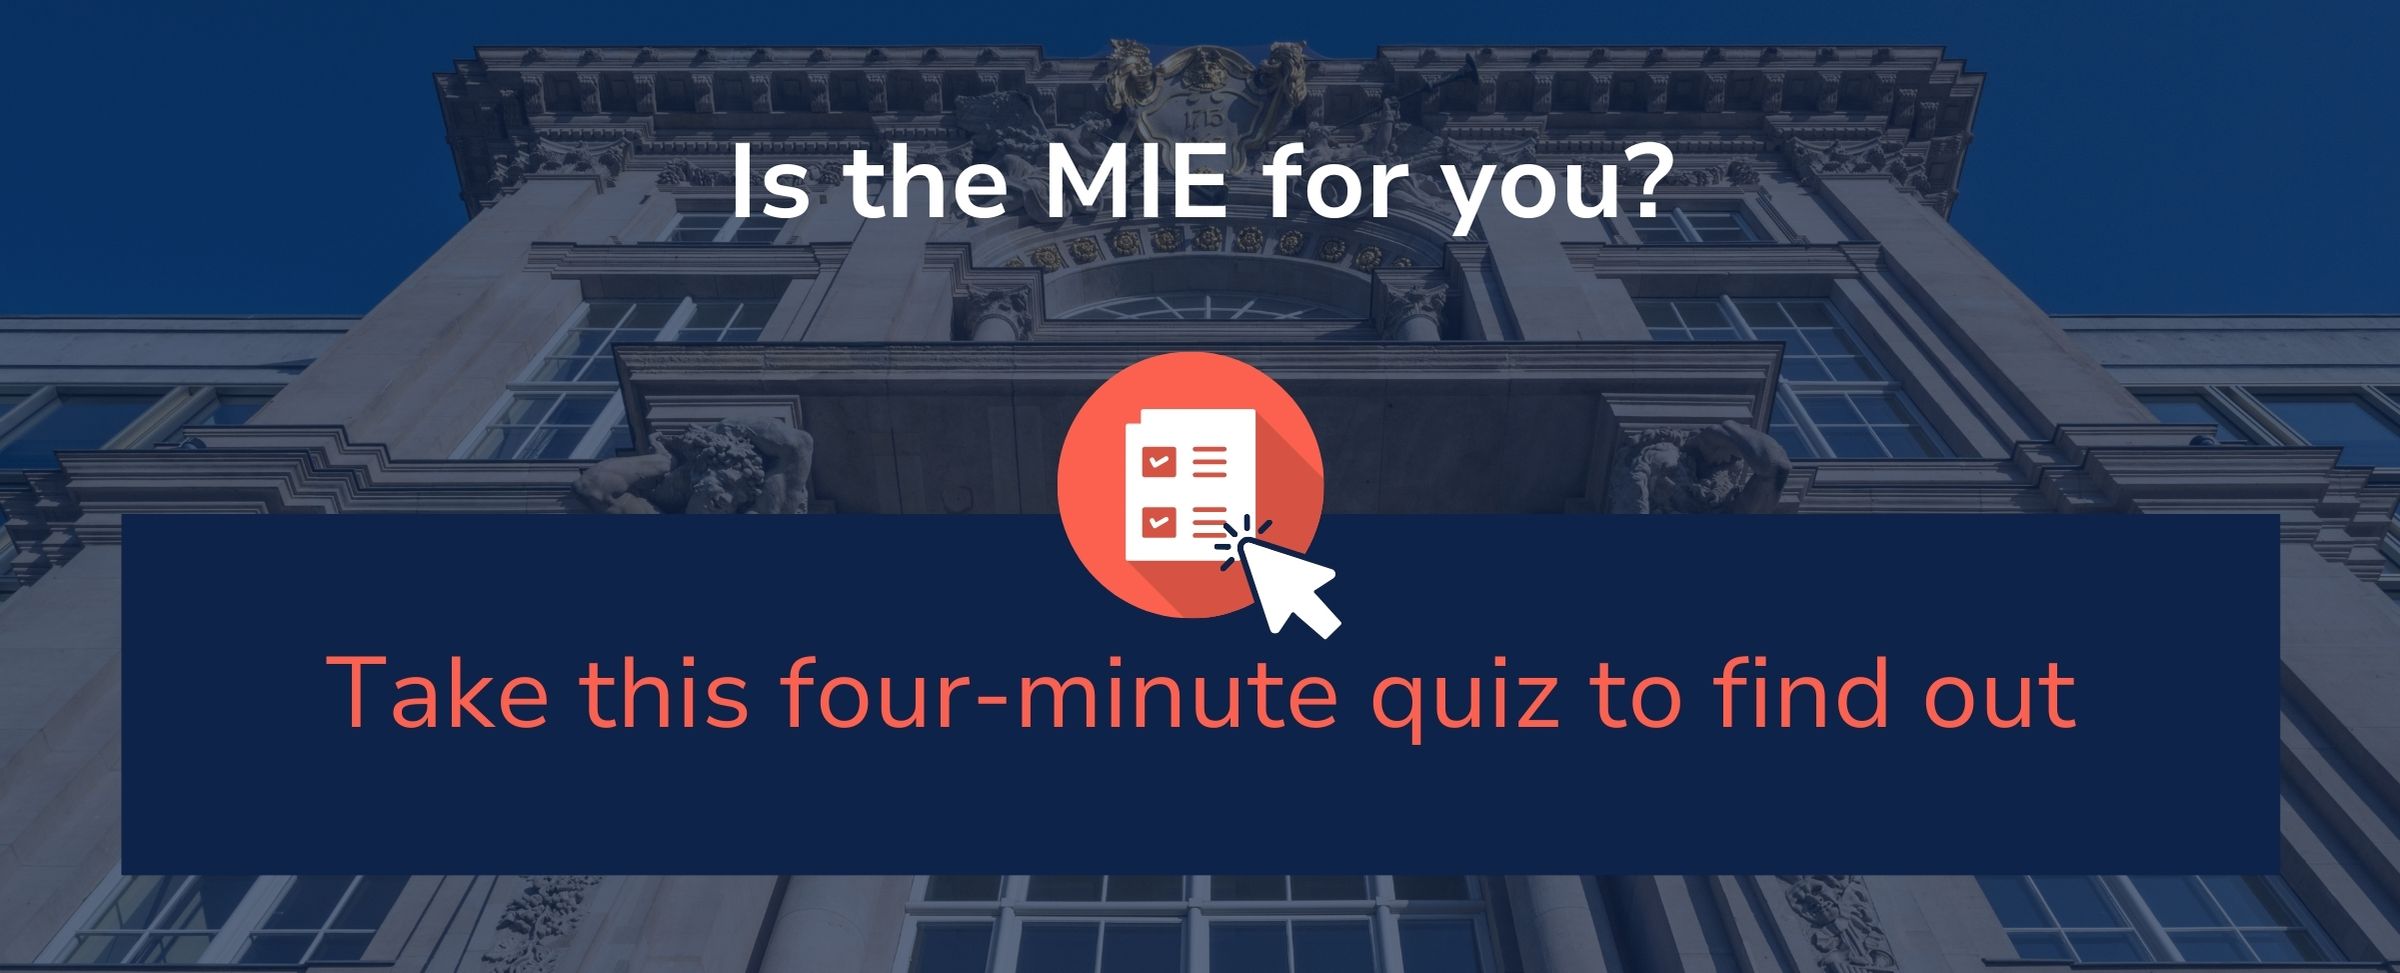 Take this four-minue quiz to find out which Master program is for you - image link